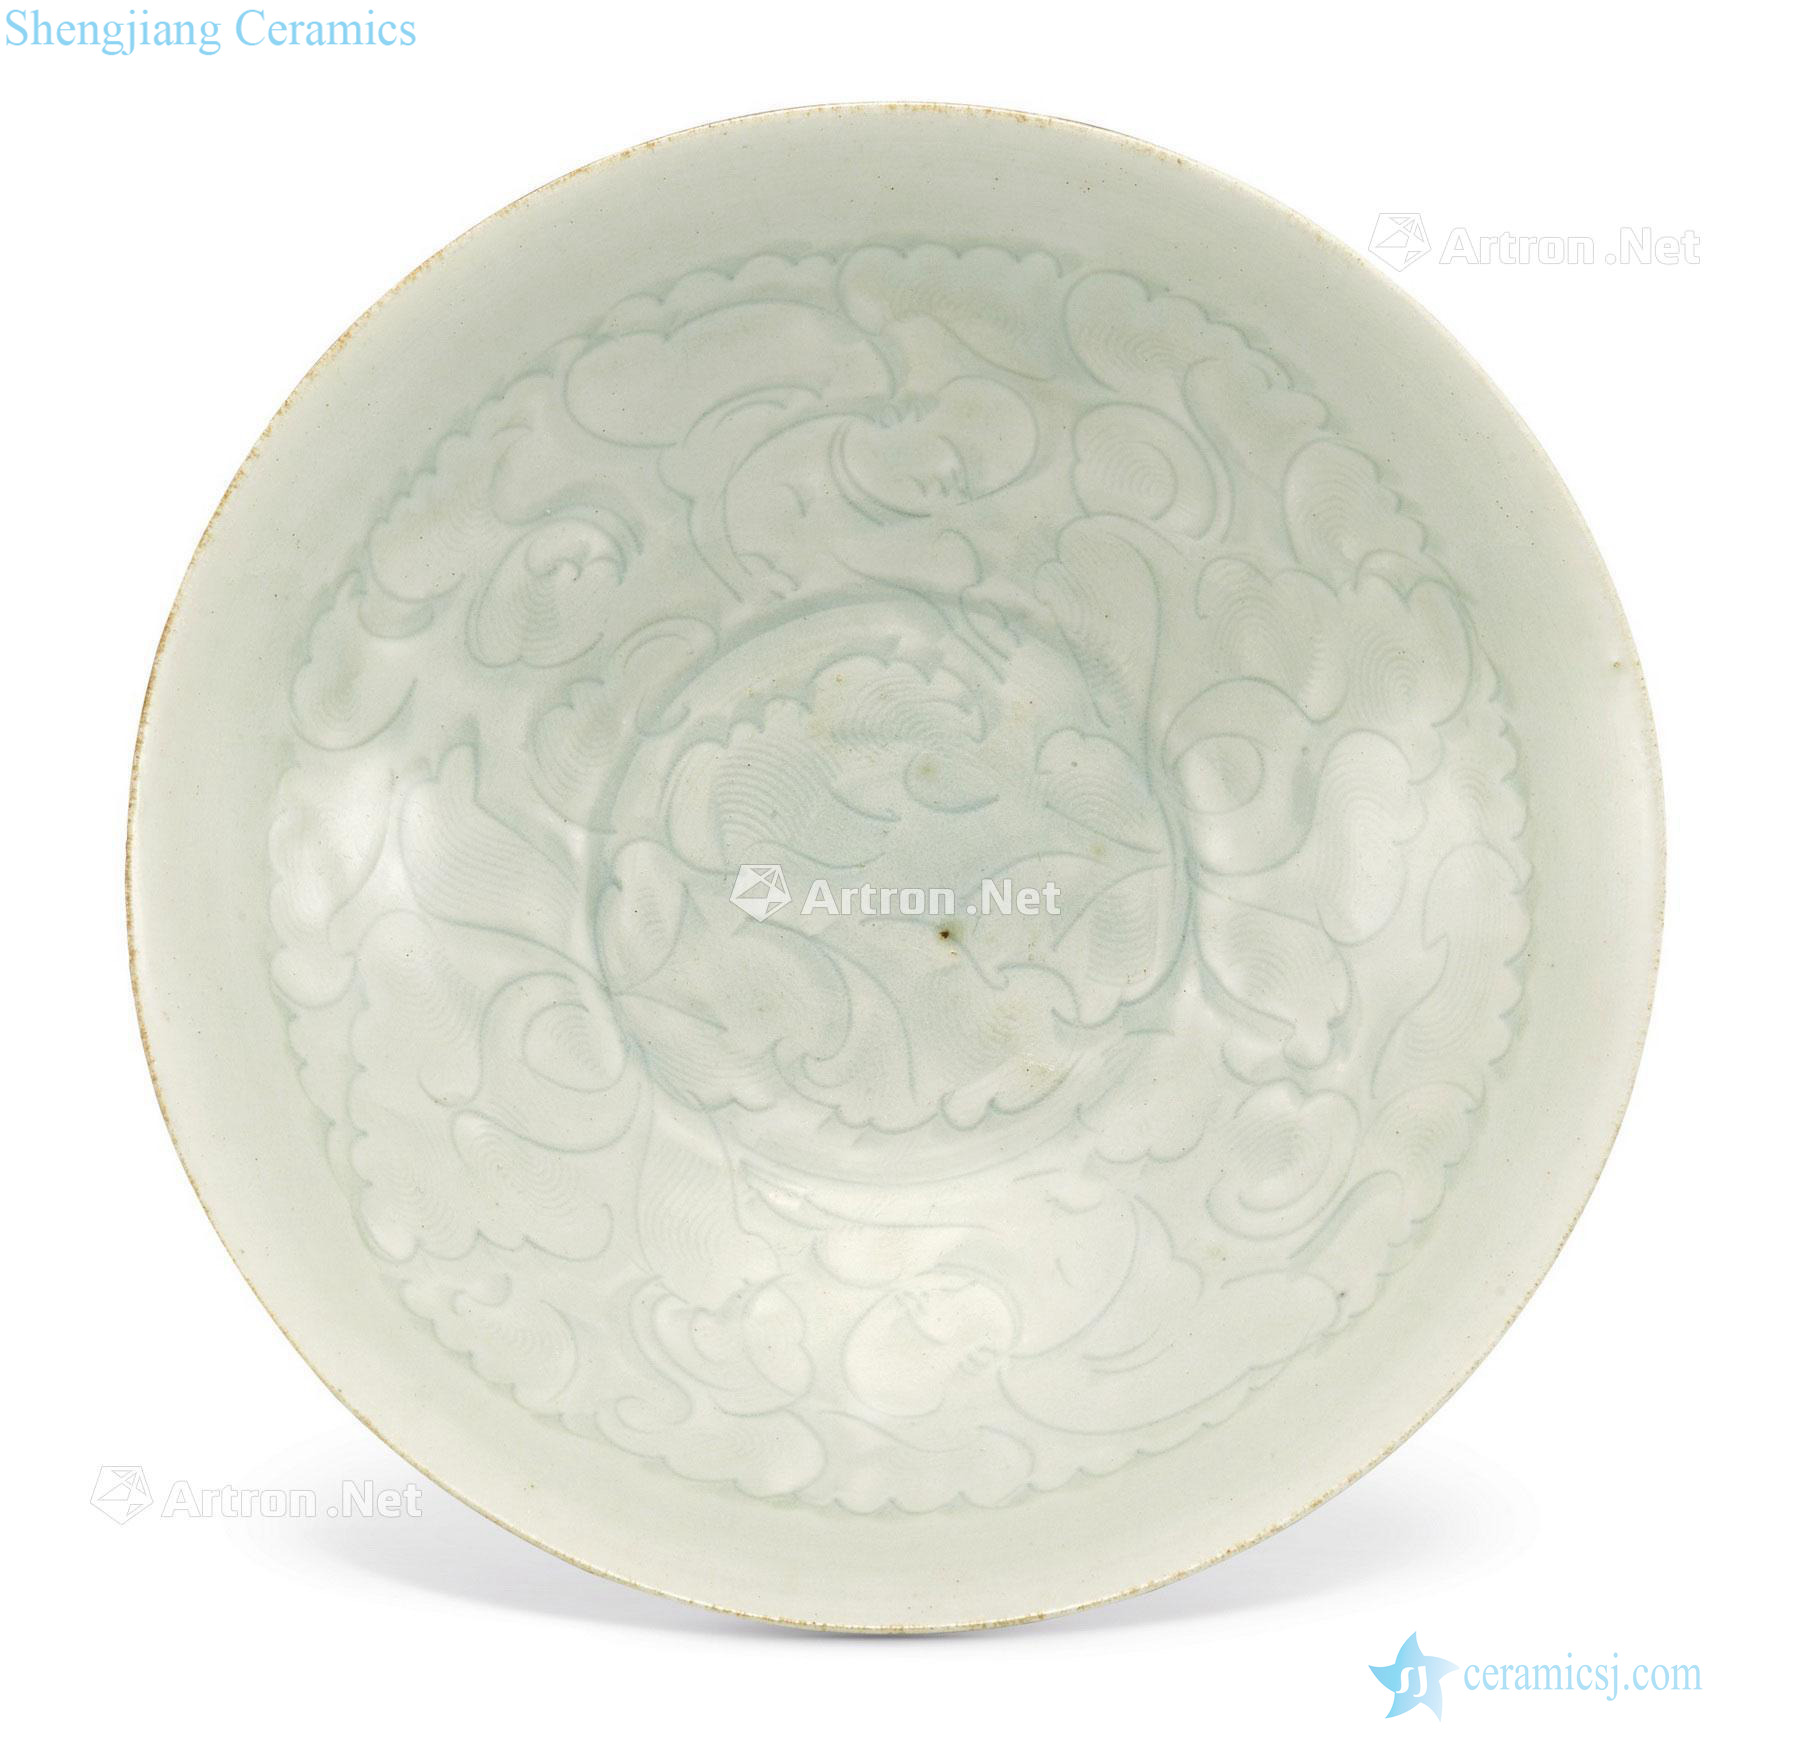 The song dynasty Green 盌 white glazed carved decorative pattern